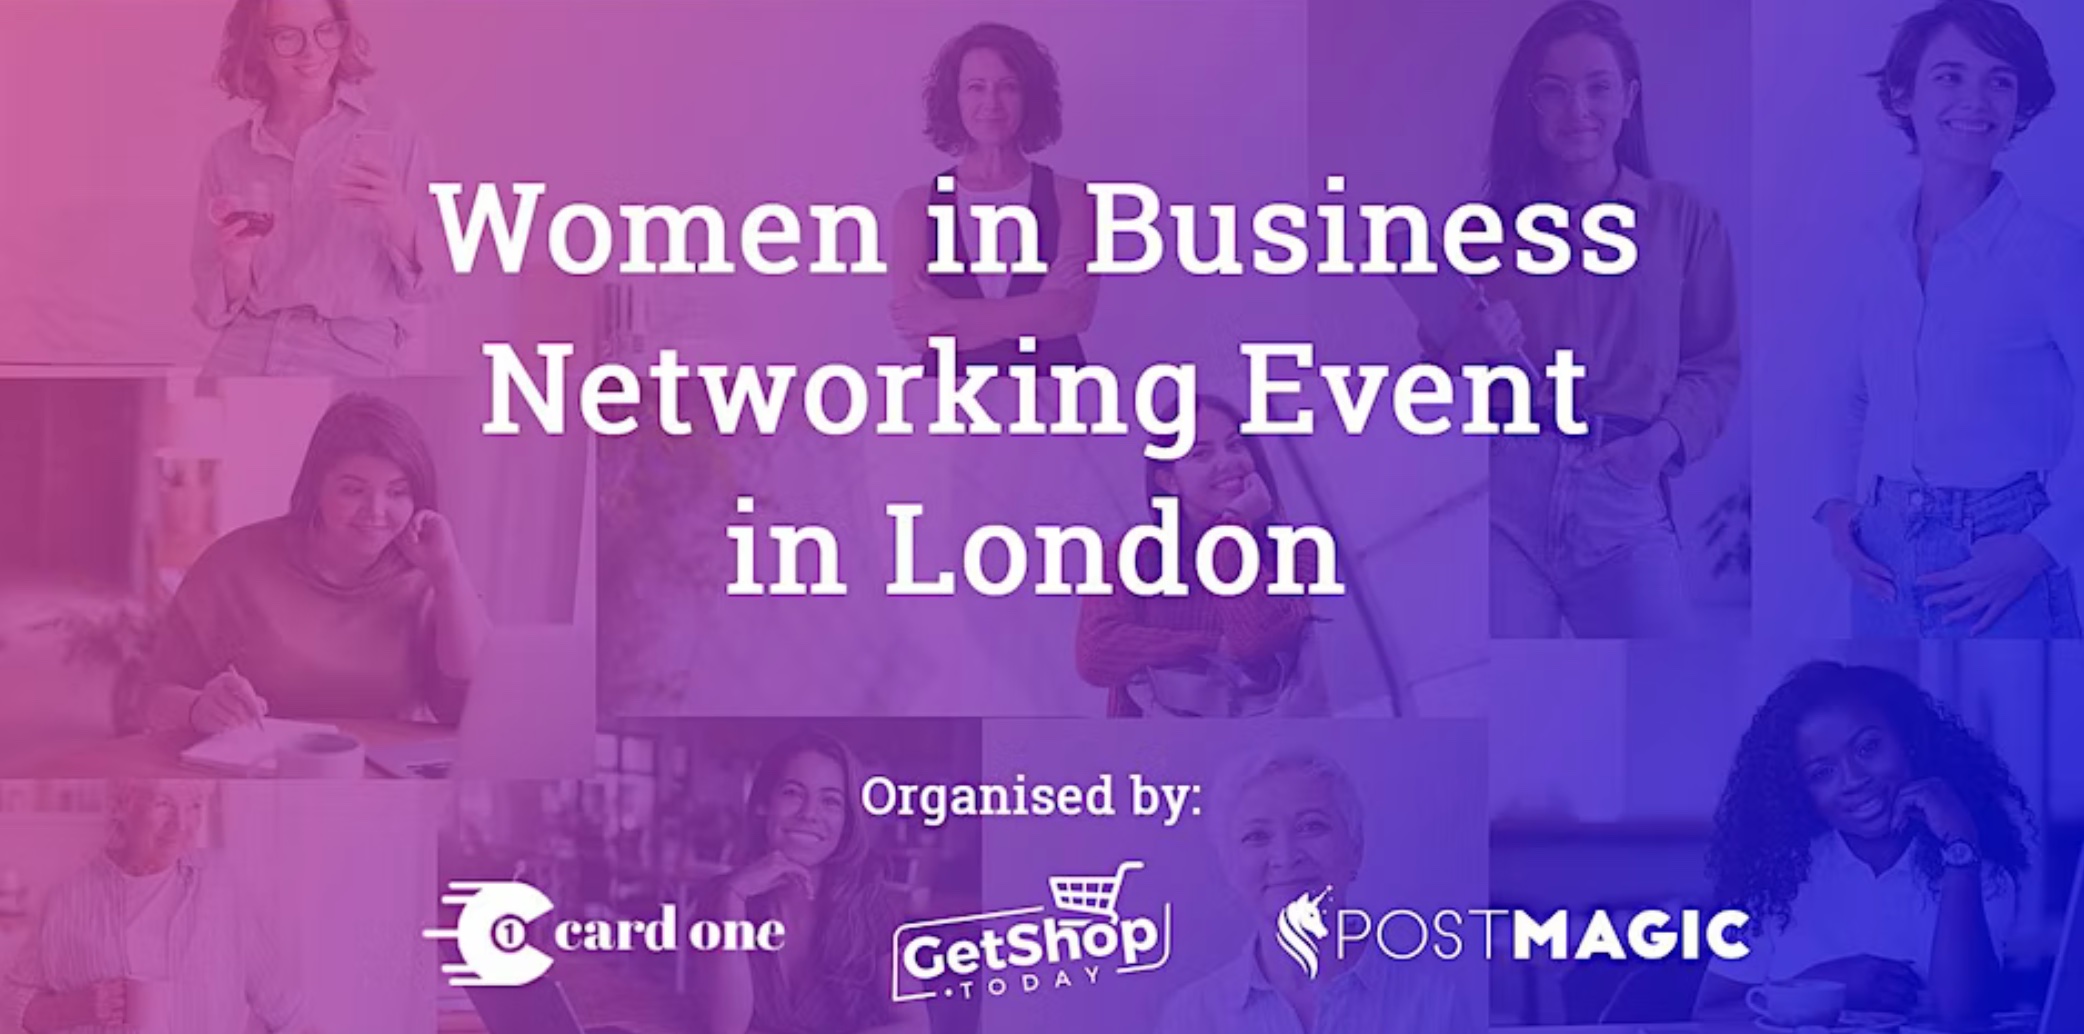 Women in Business Networking Event in London